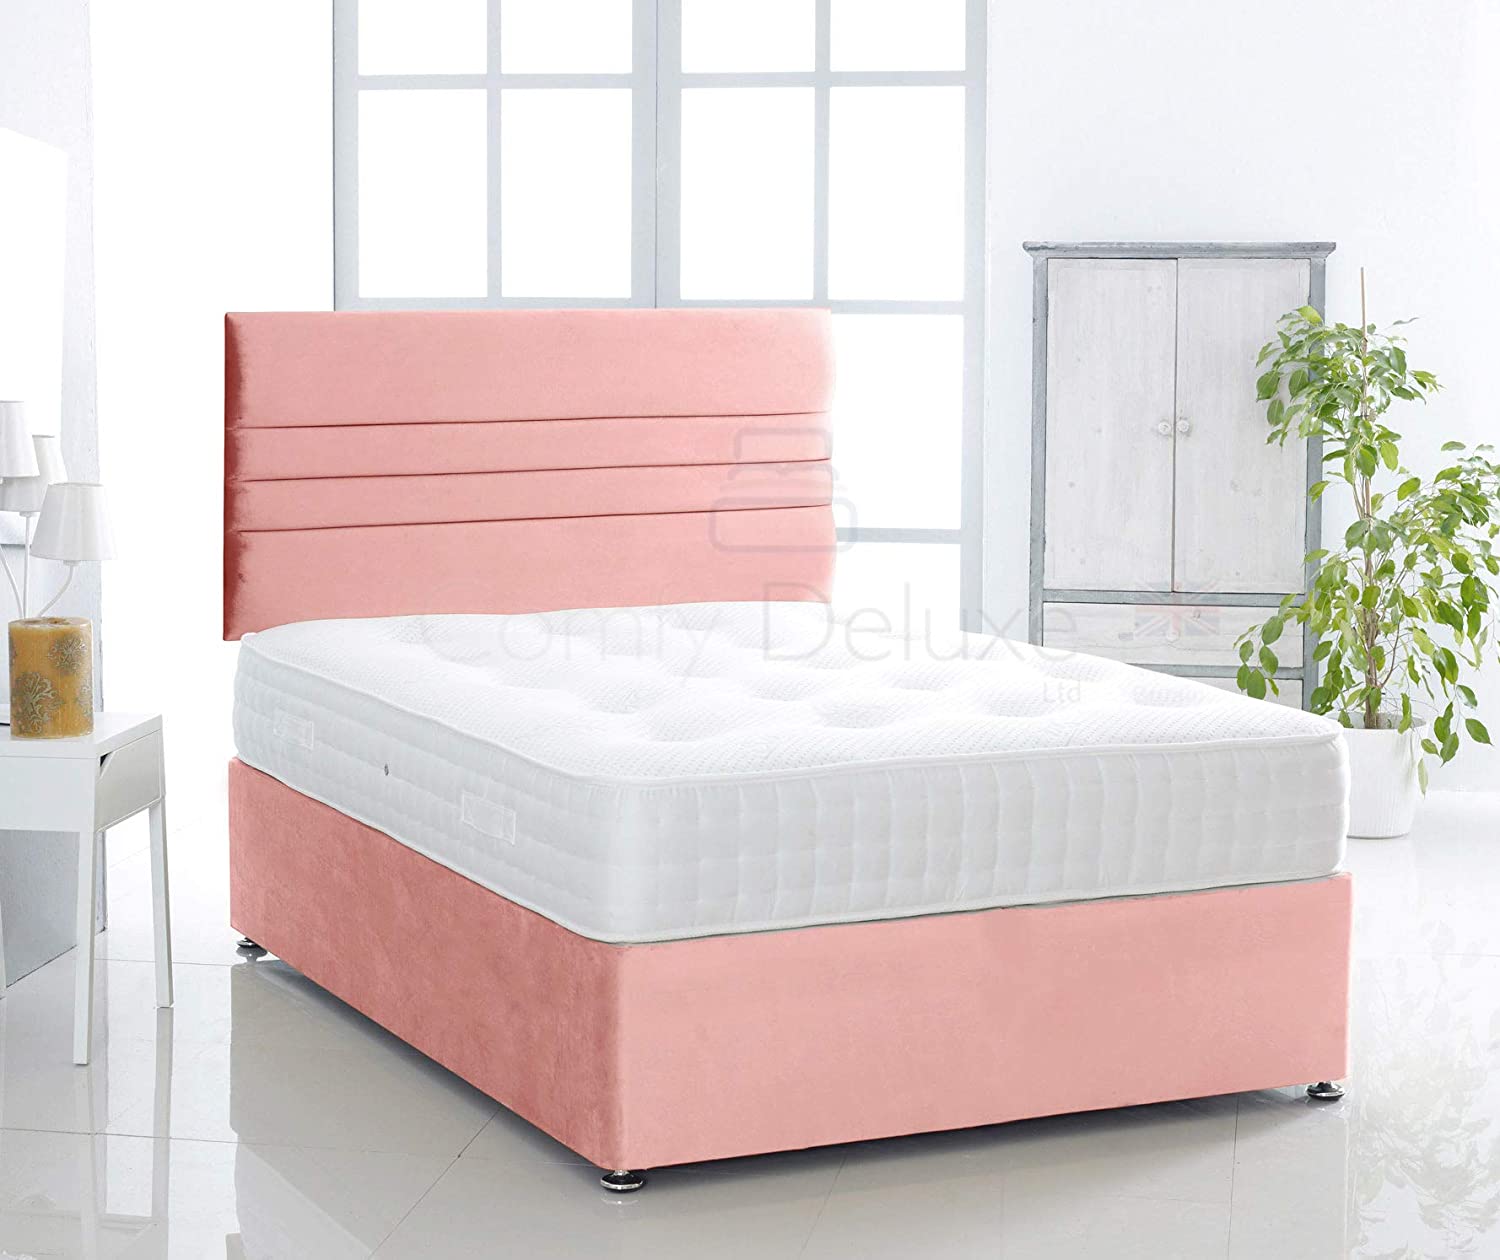 Baby-Pink-Verona-Plush-Pocket-Divan-Bed-Set-Lined-Headboard-Storage-Drawers-Faux-Leather-Chenille-Soft-Velvet-Lined-Headboard-Pocket-Mattress-Soft-Firm-Medium-Firm-Glides